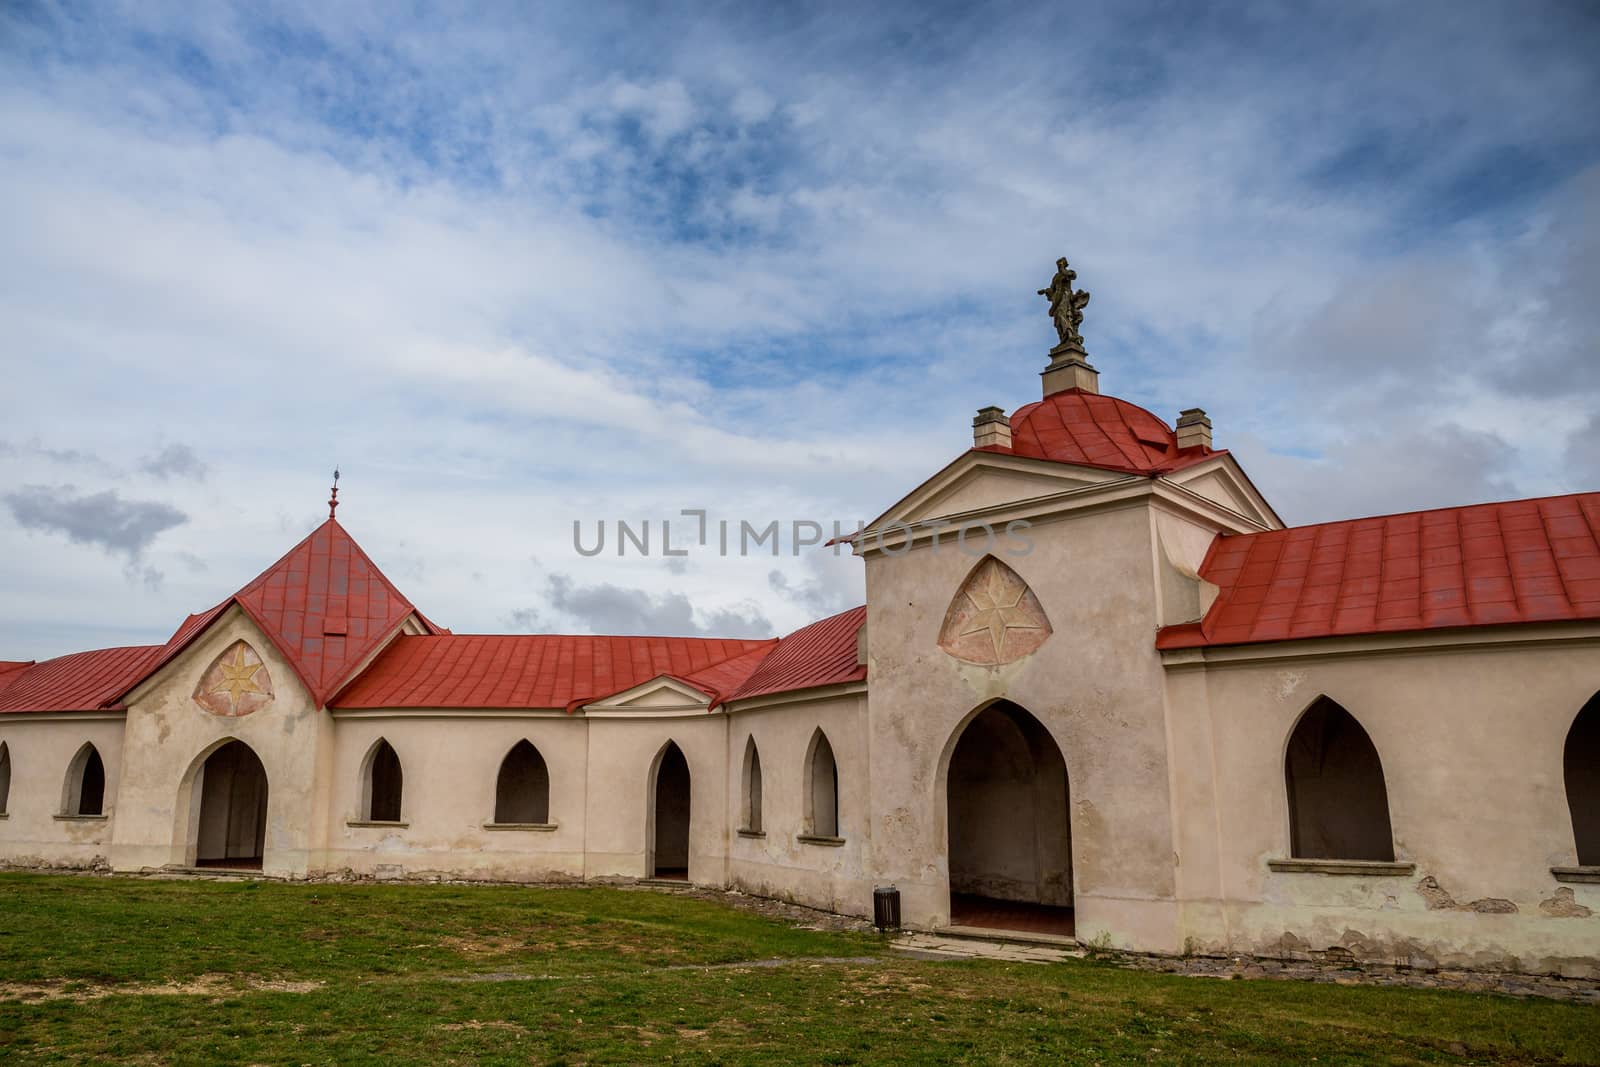 Pilgrimage Church of St John of Nepomuk at Zelena hora in Zdar nad Sazavou, national cultural heritage and the UNESCO World heritage monument